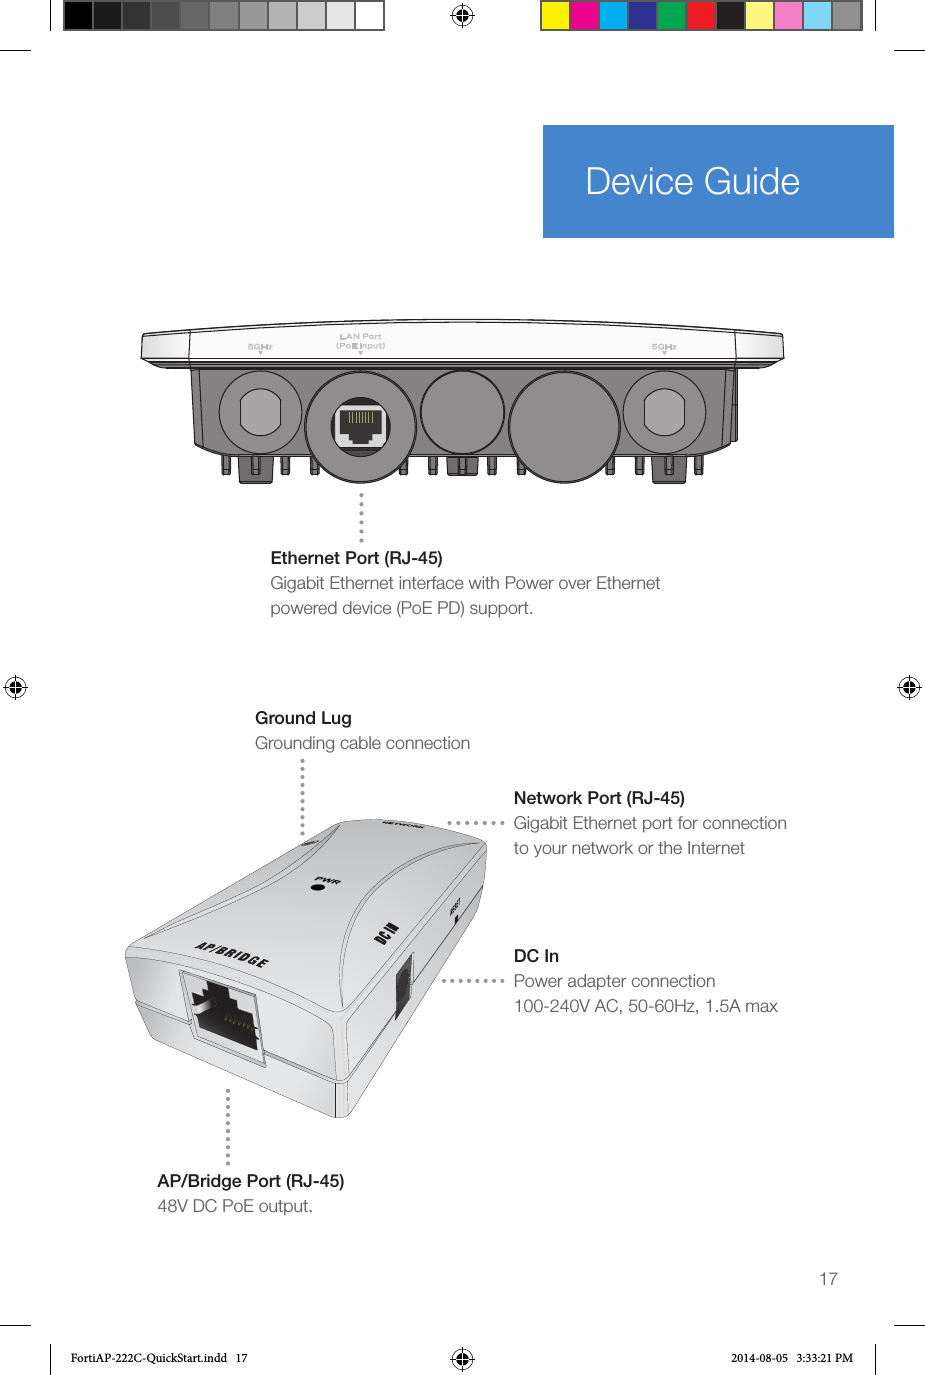 17Device GuideEthernet Port (RJ-45) Gigabit Ethernet interface with Power over Ethernet powered device (PoE PD) support.Ground LugGrounding cable connectionDC InPower adapter connection100-240V AC, 50-60Hz, 1.5A maxAP/Bridge Port (RJ-45)48V DC PoE output. Network Port (RJ-45) Gigabit Ethernet port for connection to your network or the InternetFortiAP-222C-QuickStart.indd   17 2014-08-05   3:33:21 PM